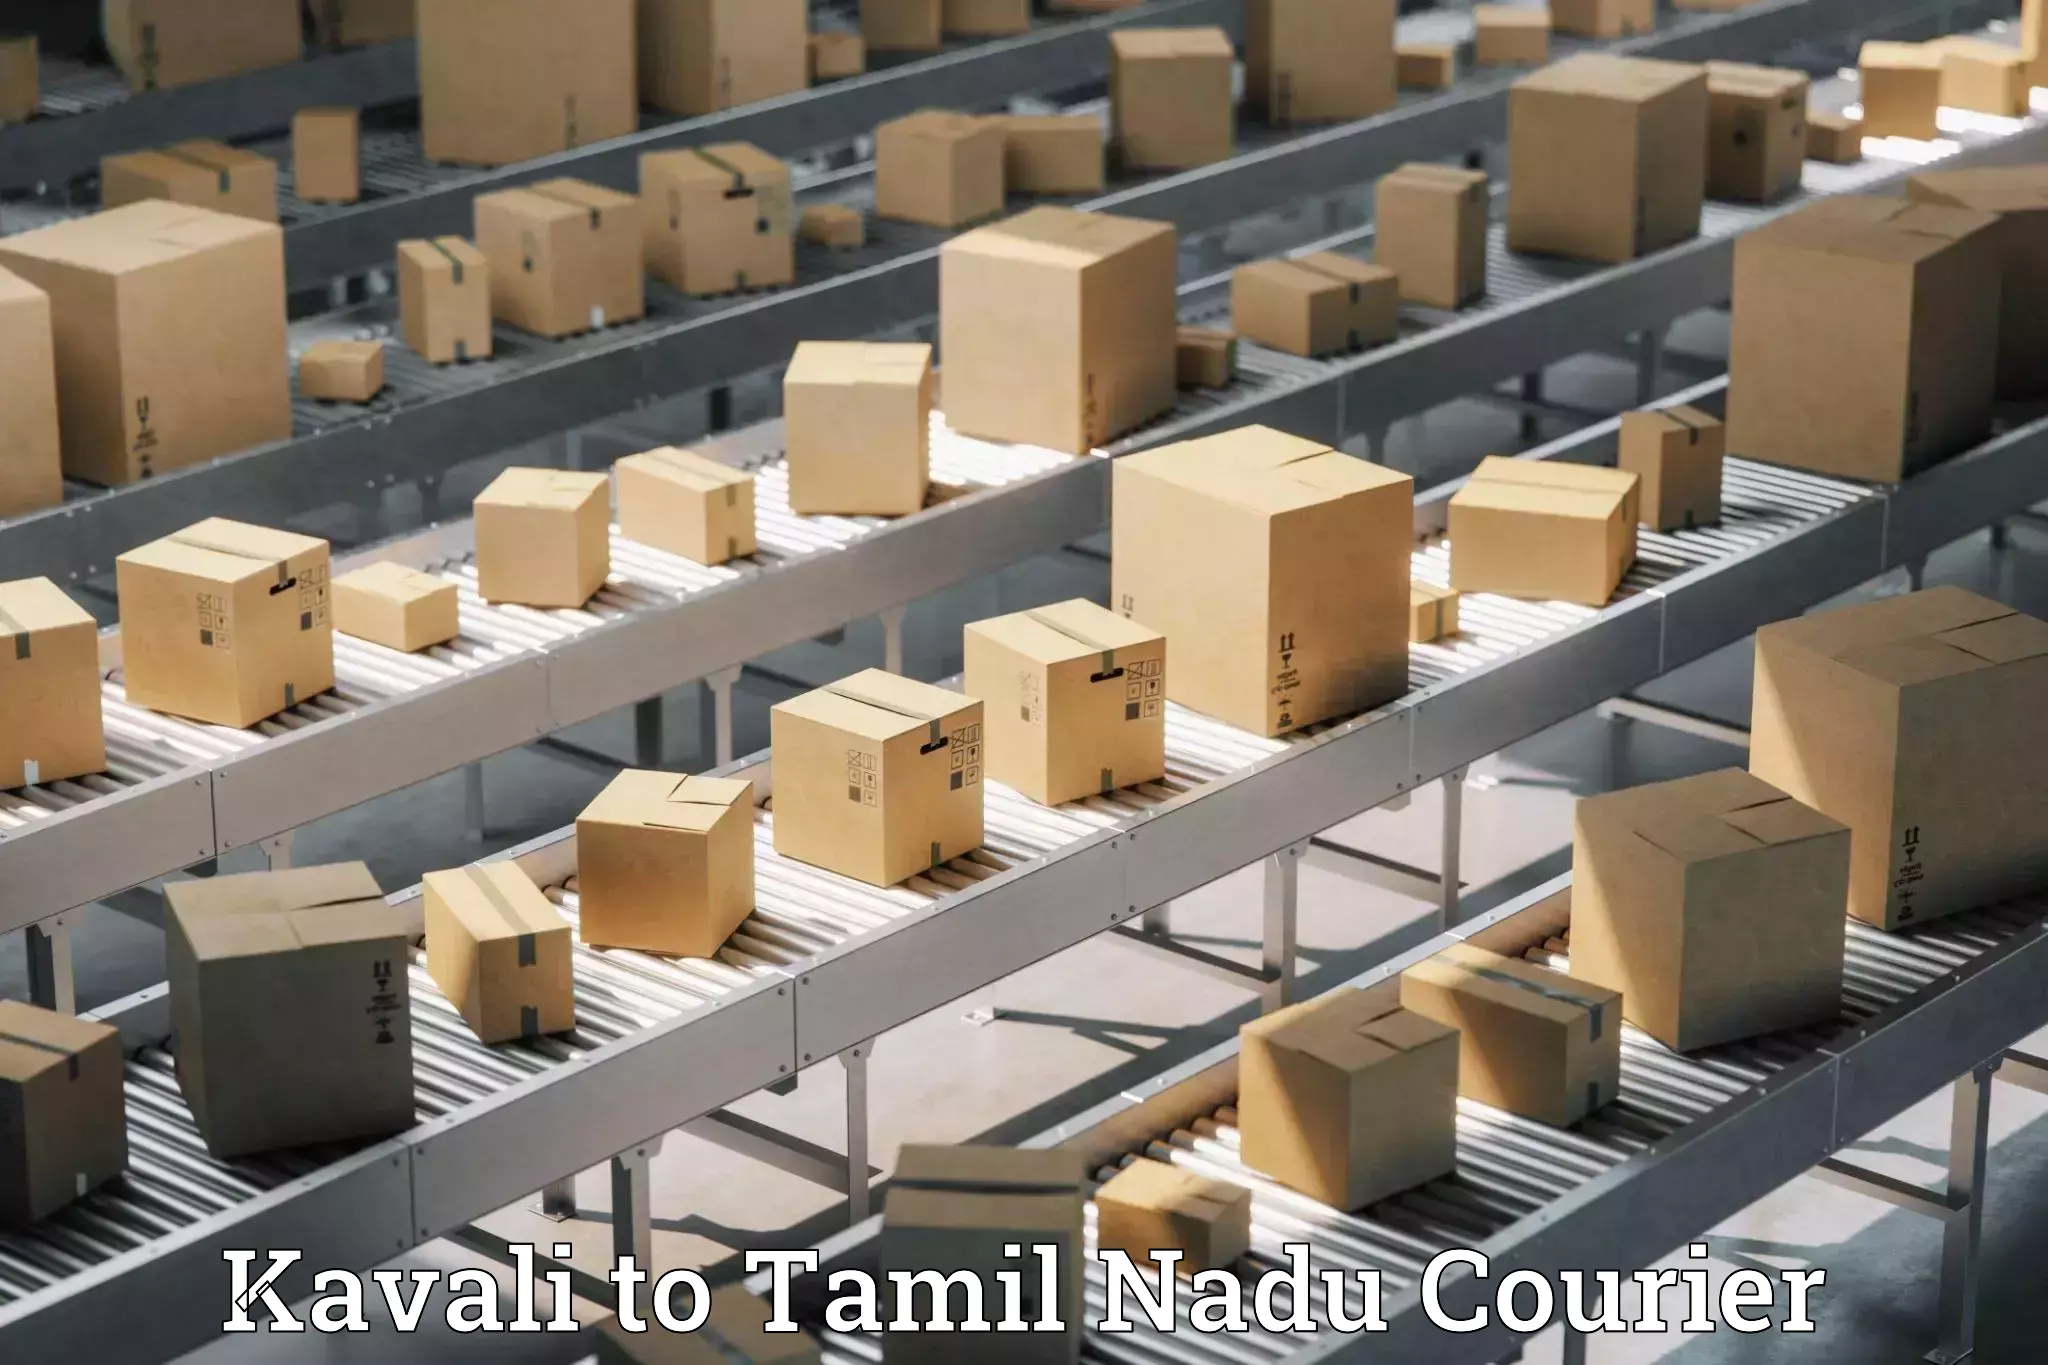 Express delivery capabilities Kavali to Eraiyur